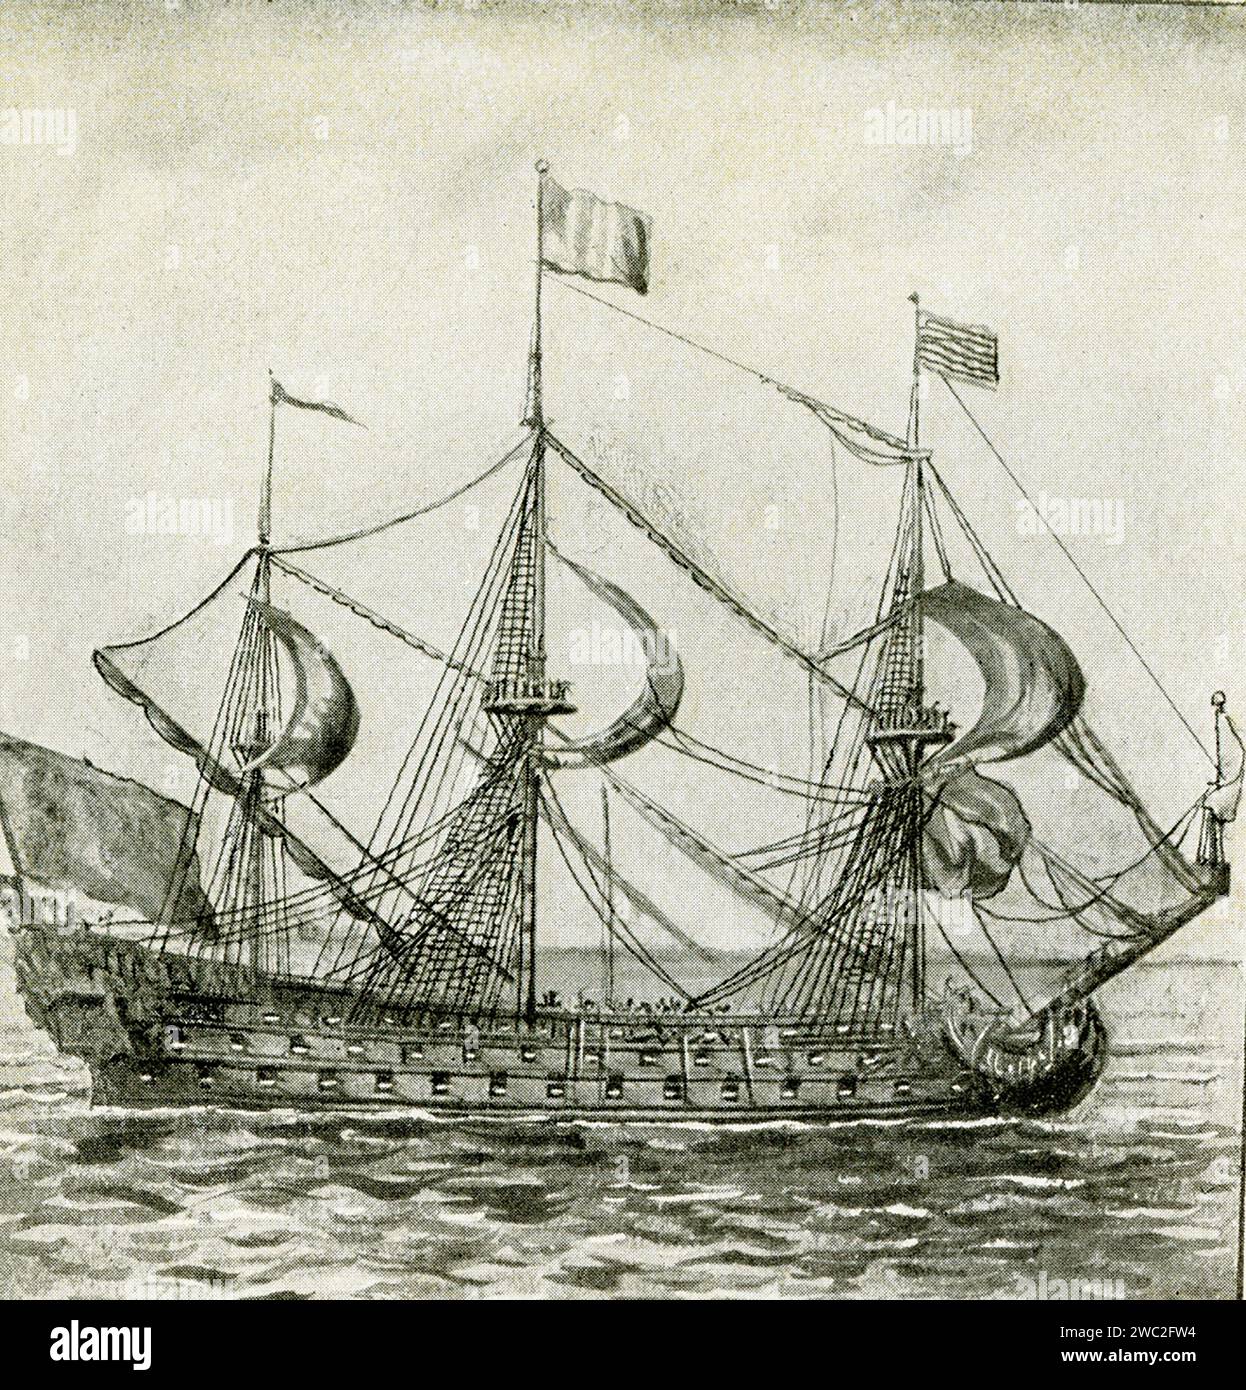 English warship from middle of 16th century. According to the 1907 caption, it was on this ship that Henry VIII met Francis I of France in Boulogne sur Mer. Stock Photo